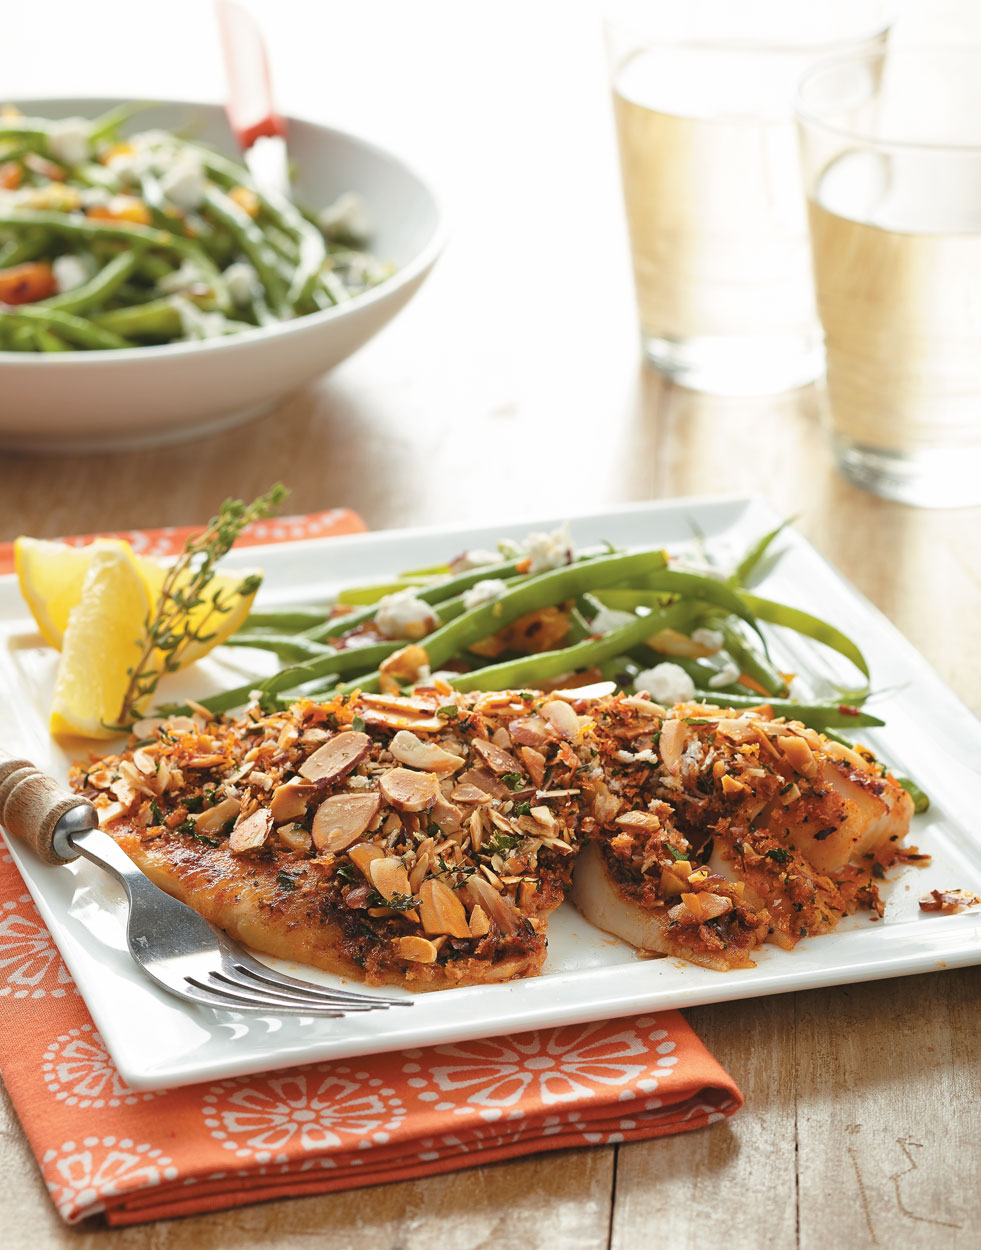 Almond-Crusted Fish with Smoked Paprika